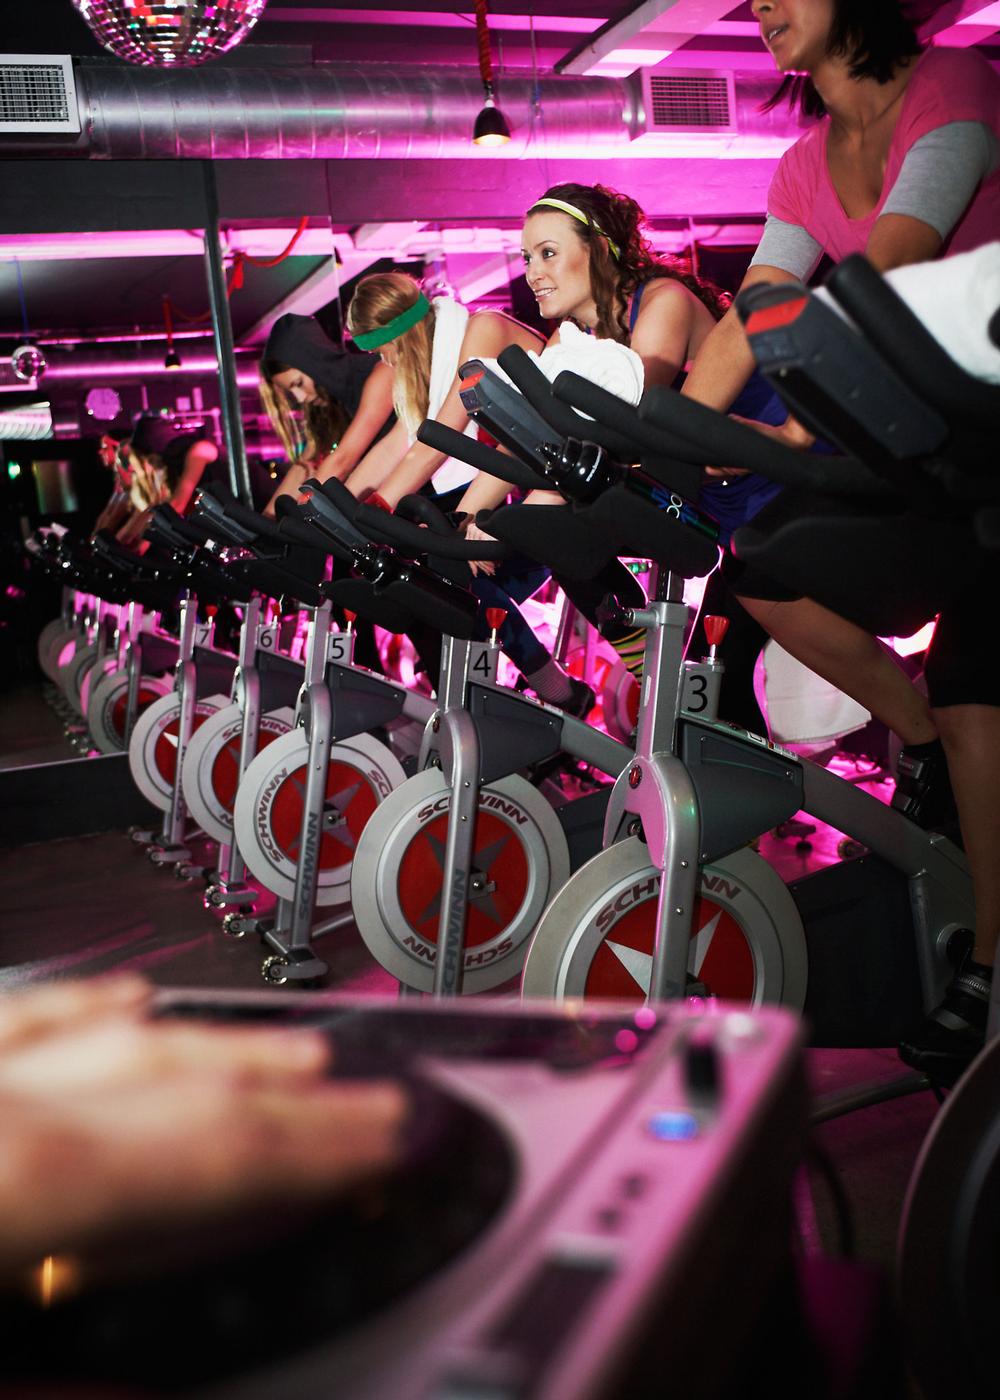 Microgyms such as Boom Cycle cater for those who crave a higher quality experience